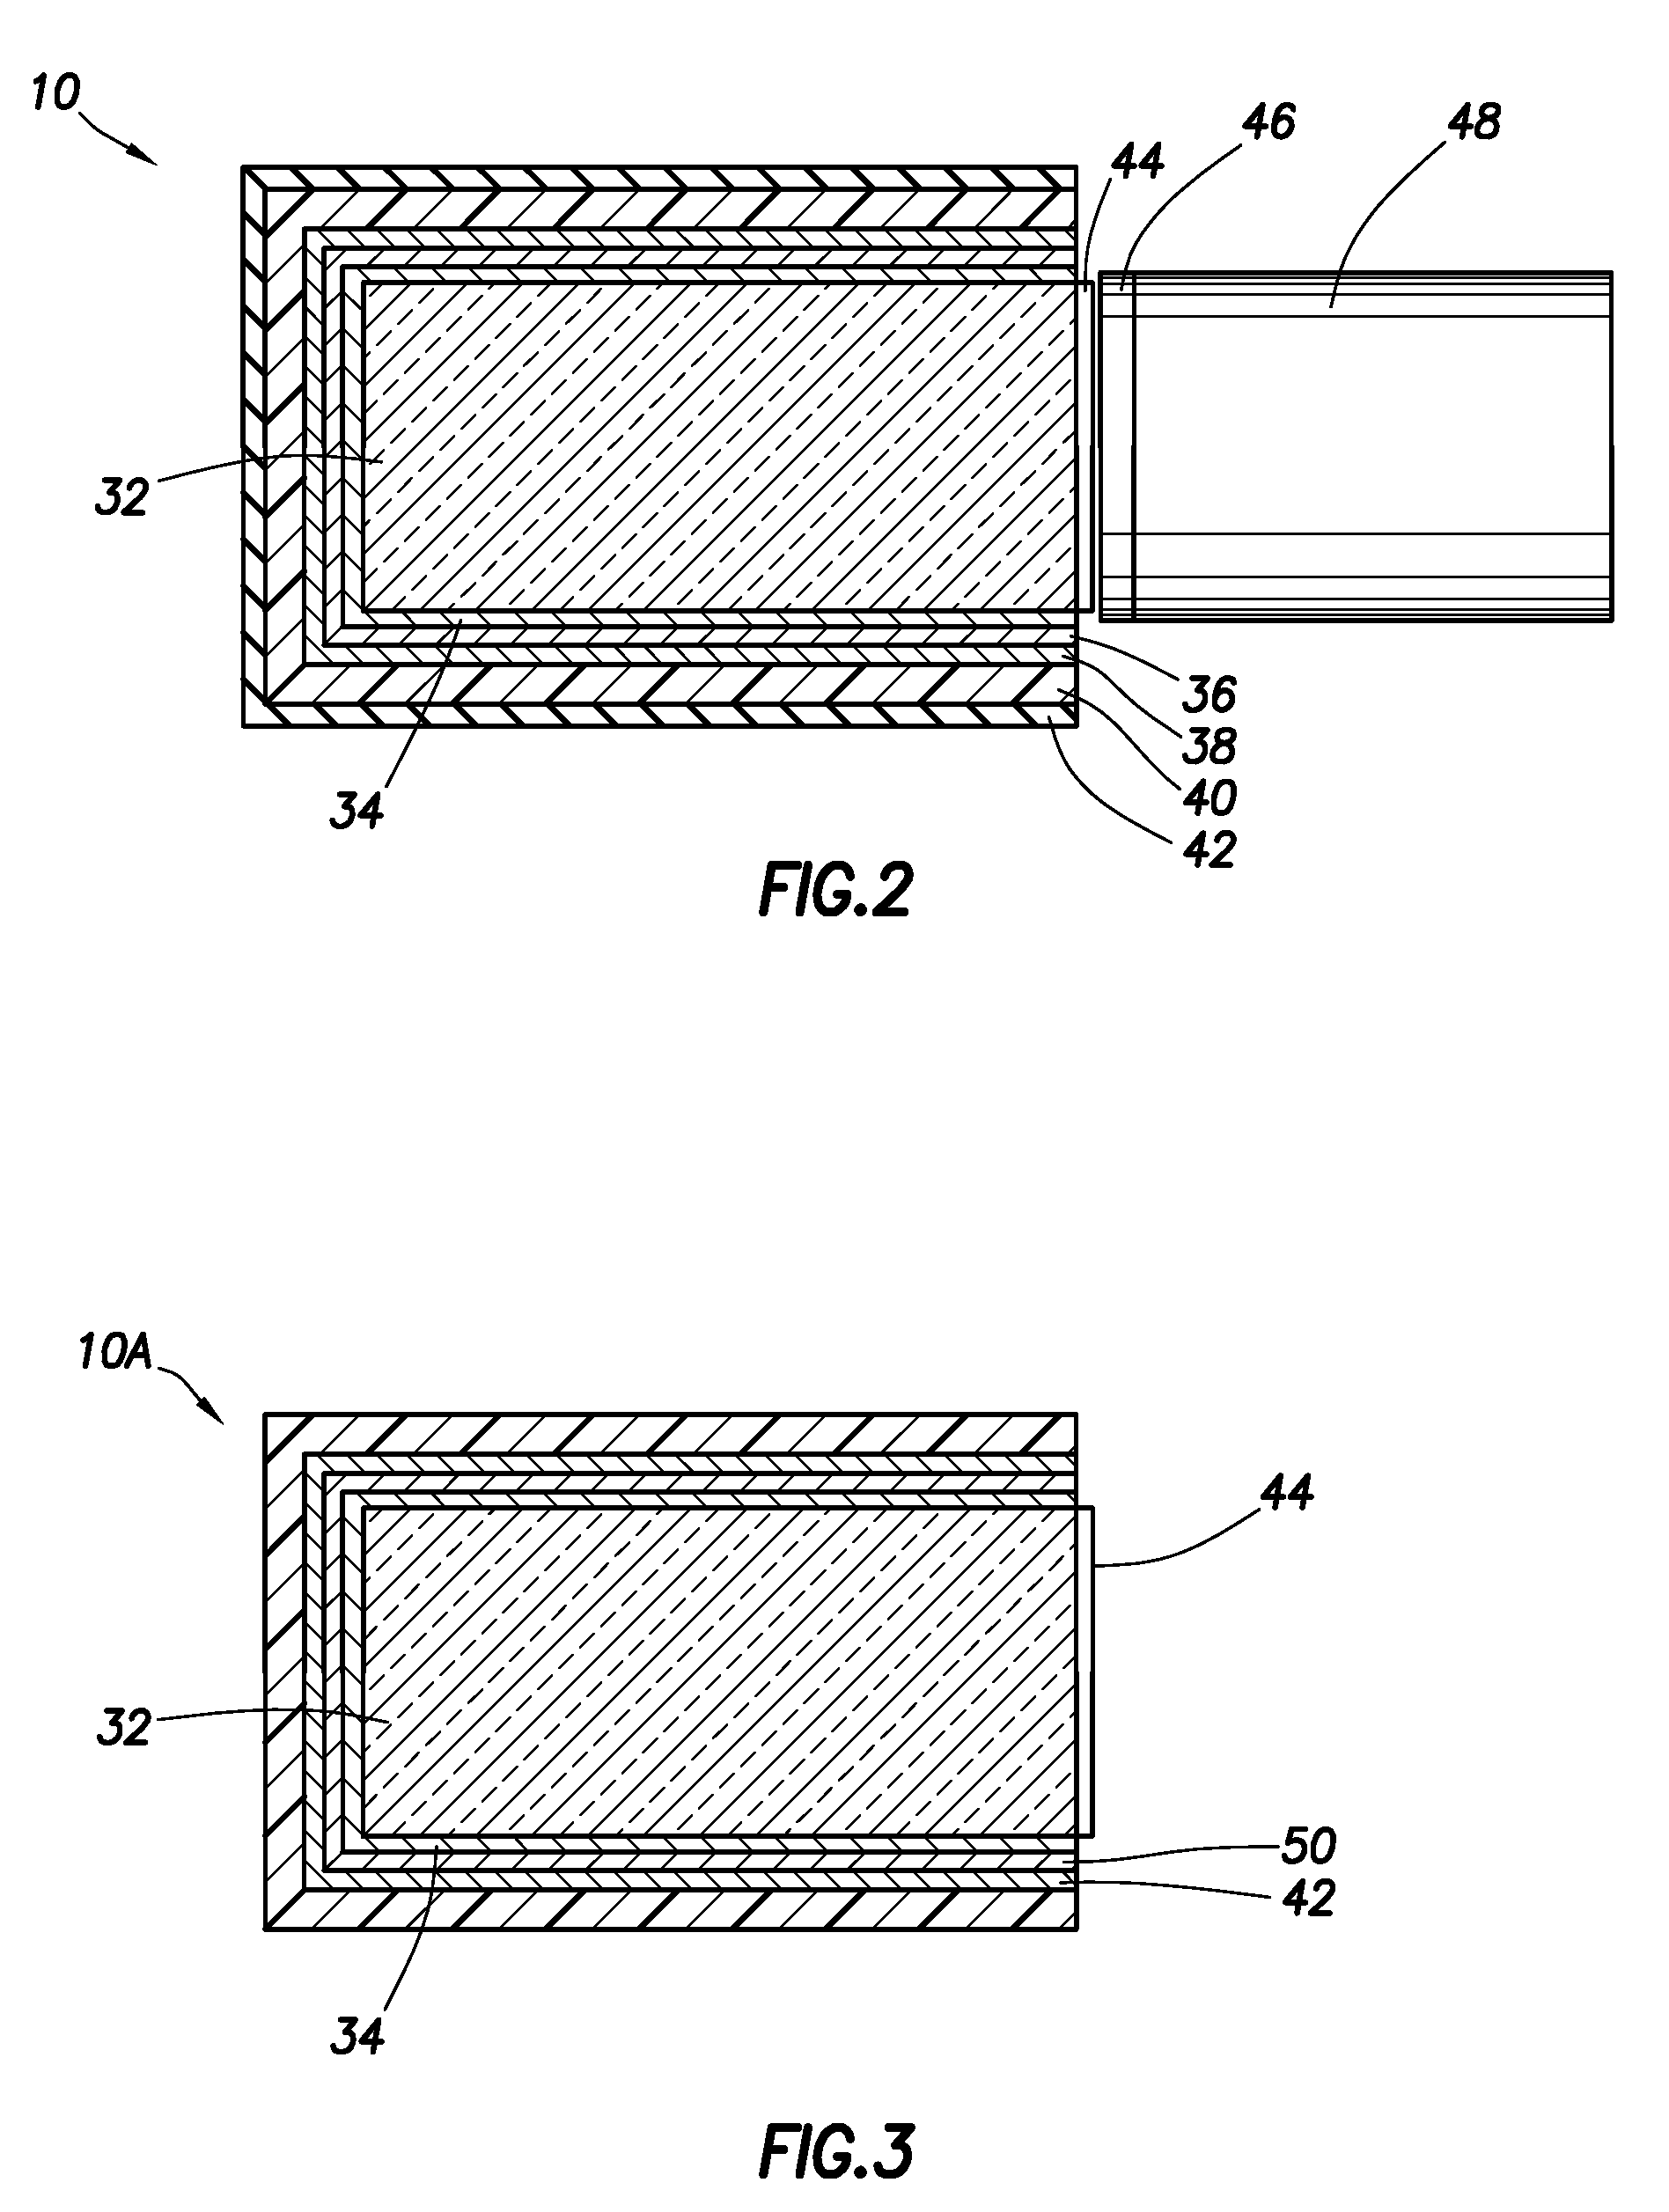 Hermetically Sealed Packaging and Neutron Shielding for Scintillation-Type Radiation Detectors